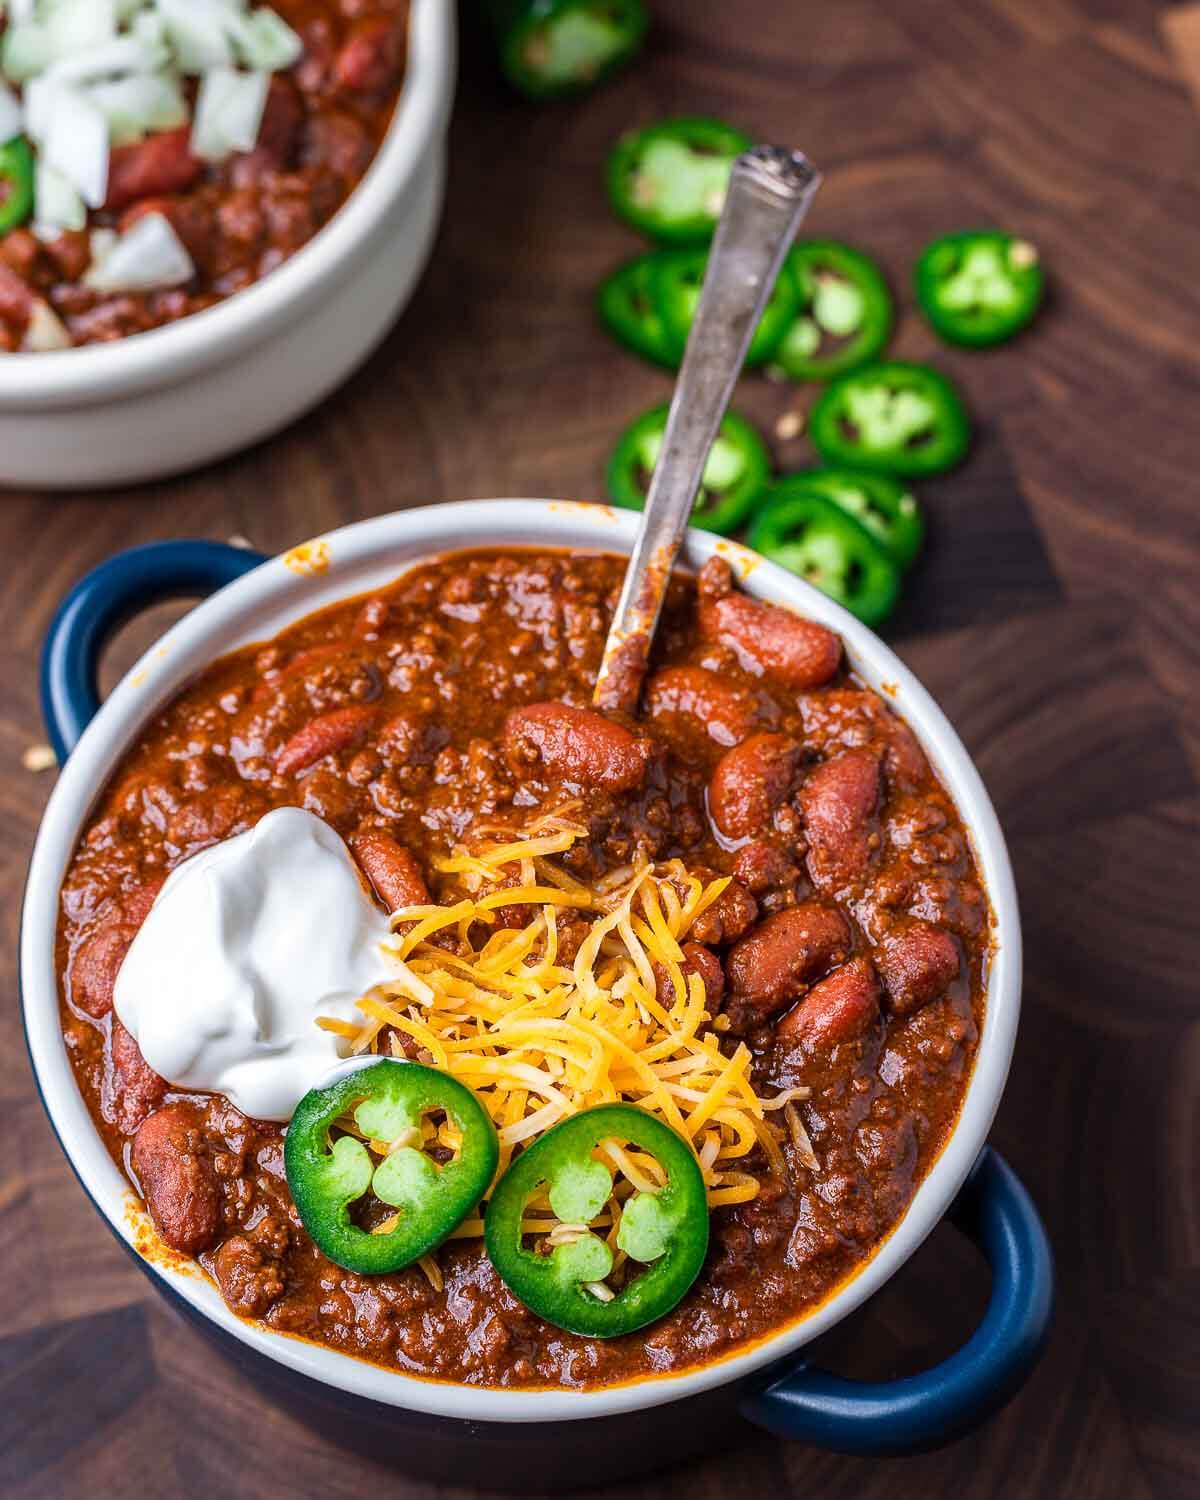 Bowl of chili topped with jalapeno, cheddar cheese, and sour cream.